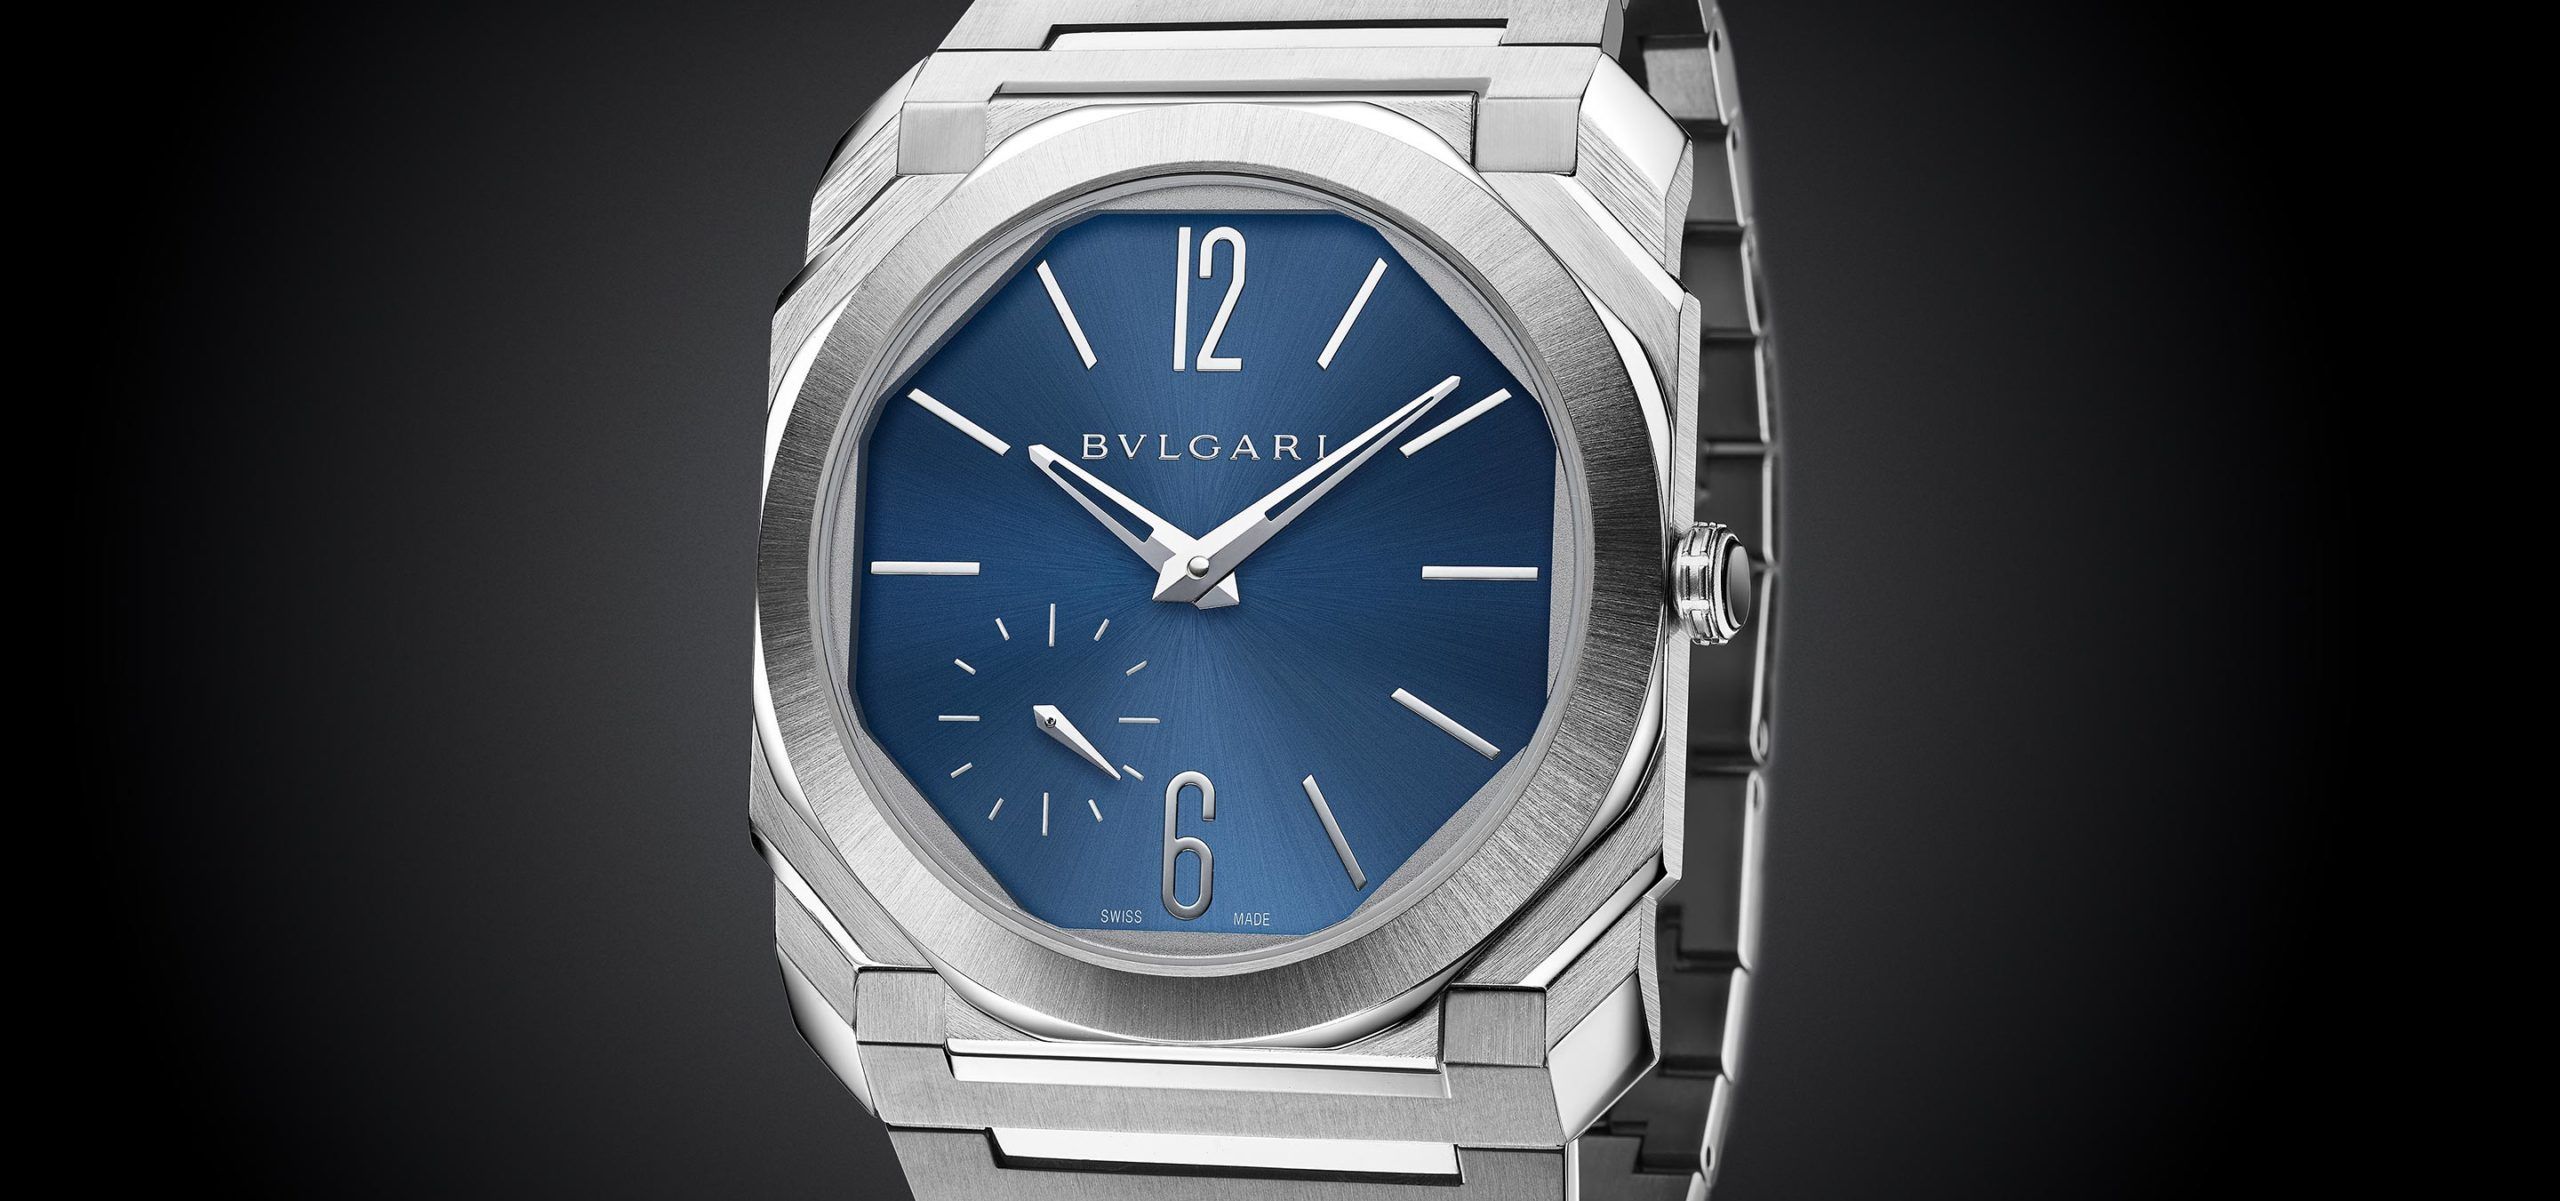 The ‘Thinissimo’ Game-Changer: Presenting The Best Bulgari Octo Finissimo Timepieces